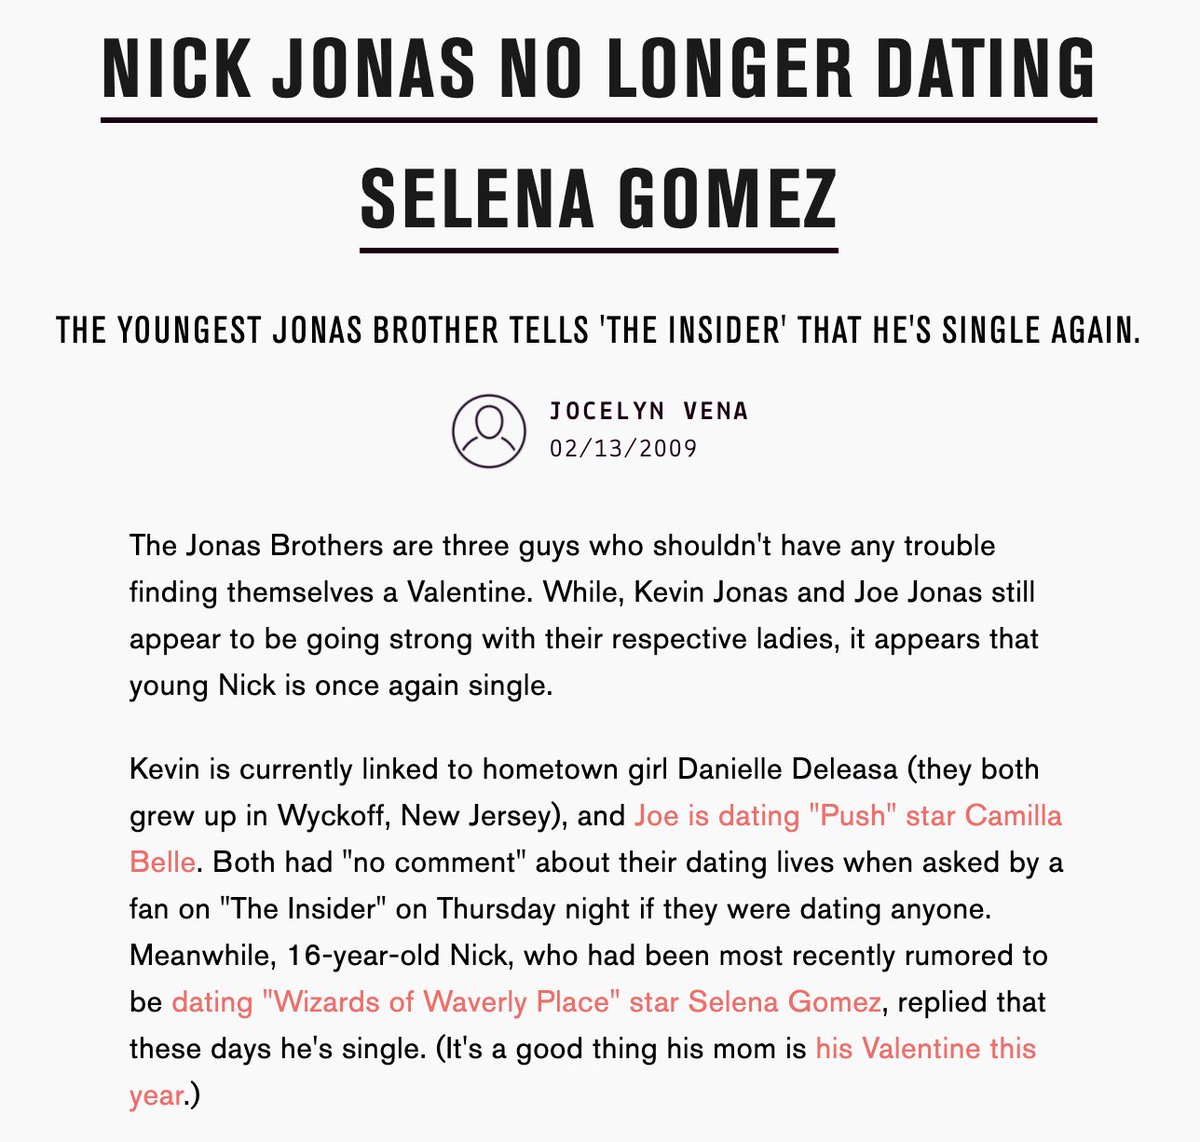 February 11, 2009: Nick Jonas and Selena Gomez broke up. It was reported three days later, on Valentine’s Day.